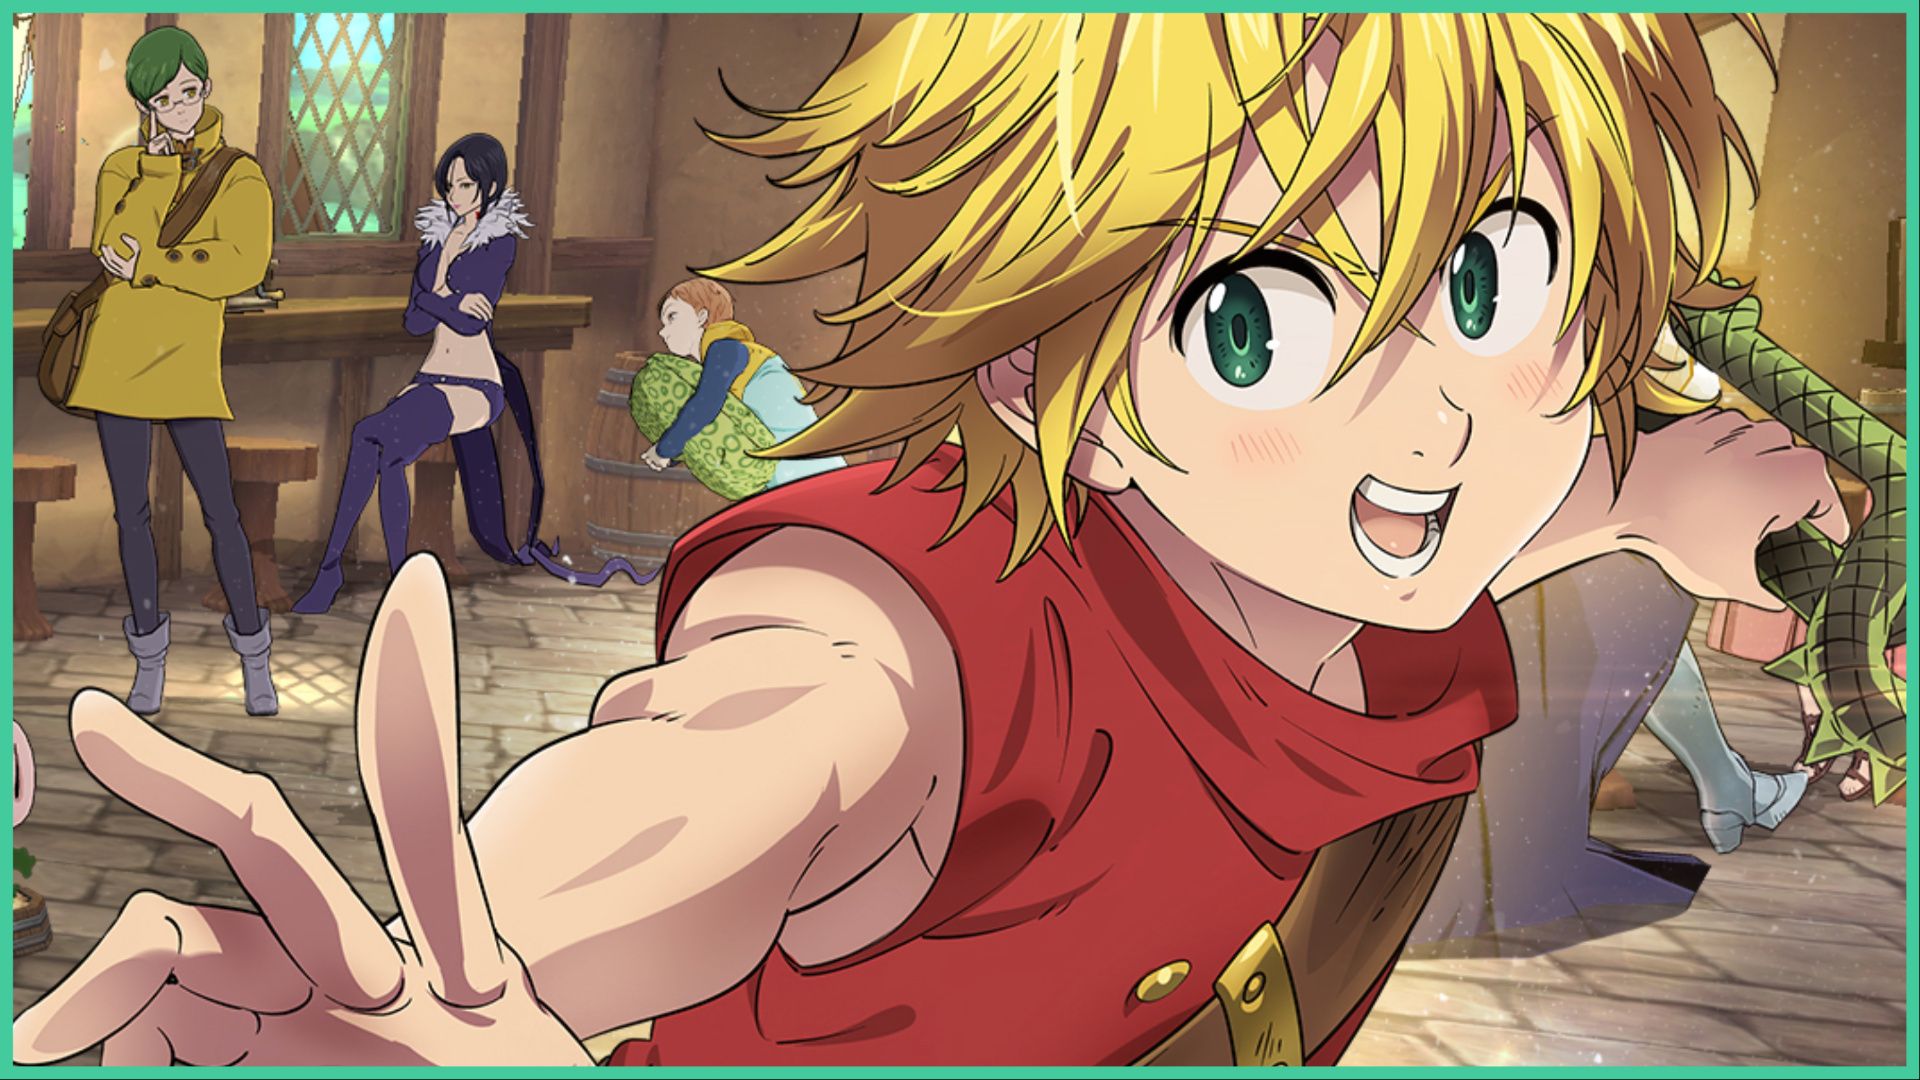 feature image for our 7ds grand cross tier list, the image features promo art for the game of characters from the seven deadly sins franchise inside a tavern, with the main character, meliodas, at the forefront smiling as he holds his weapon back and reaches his hand out